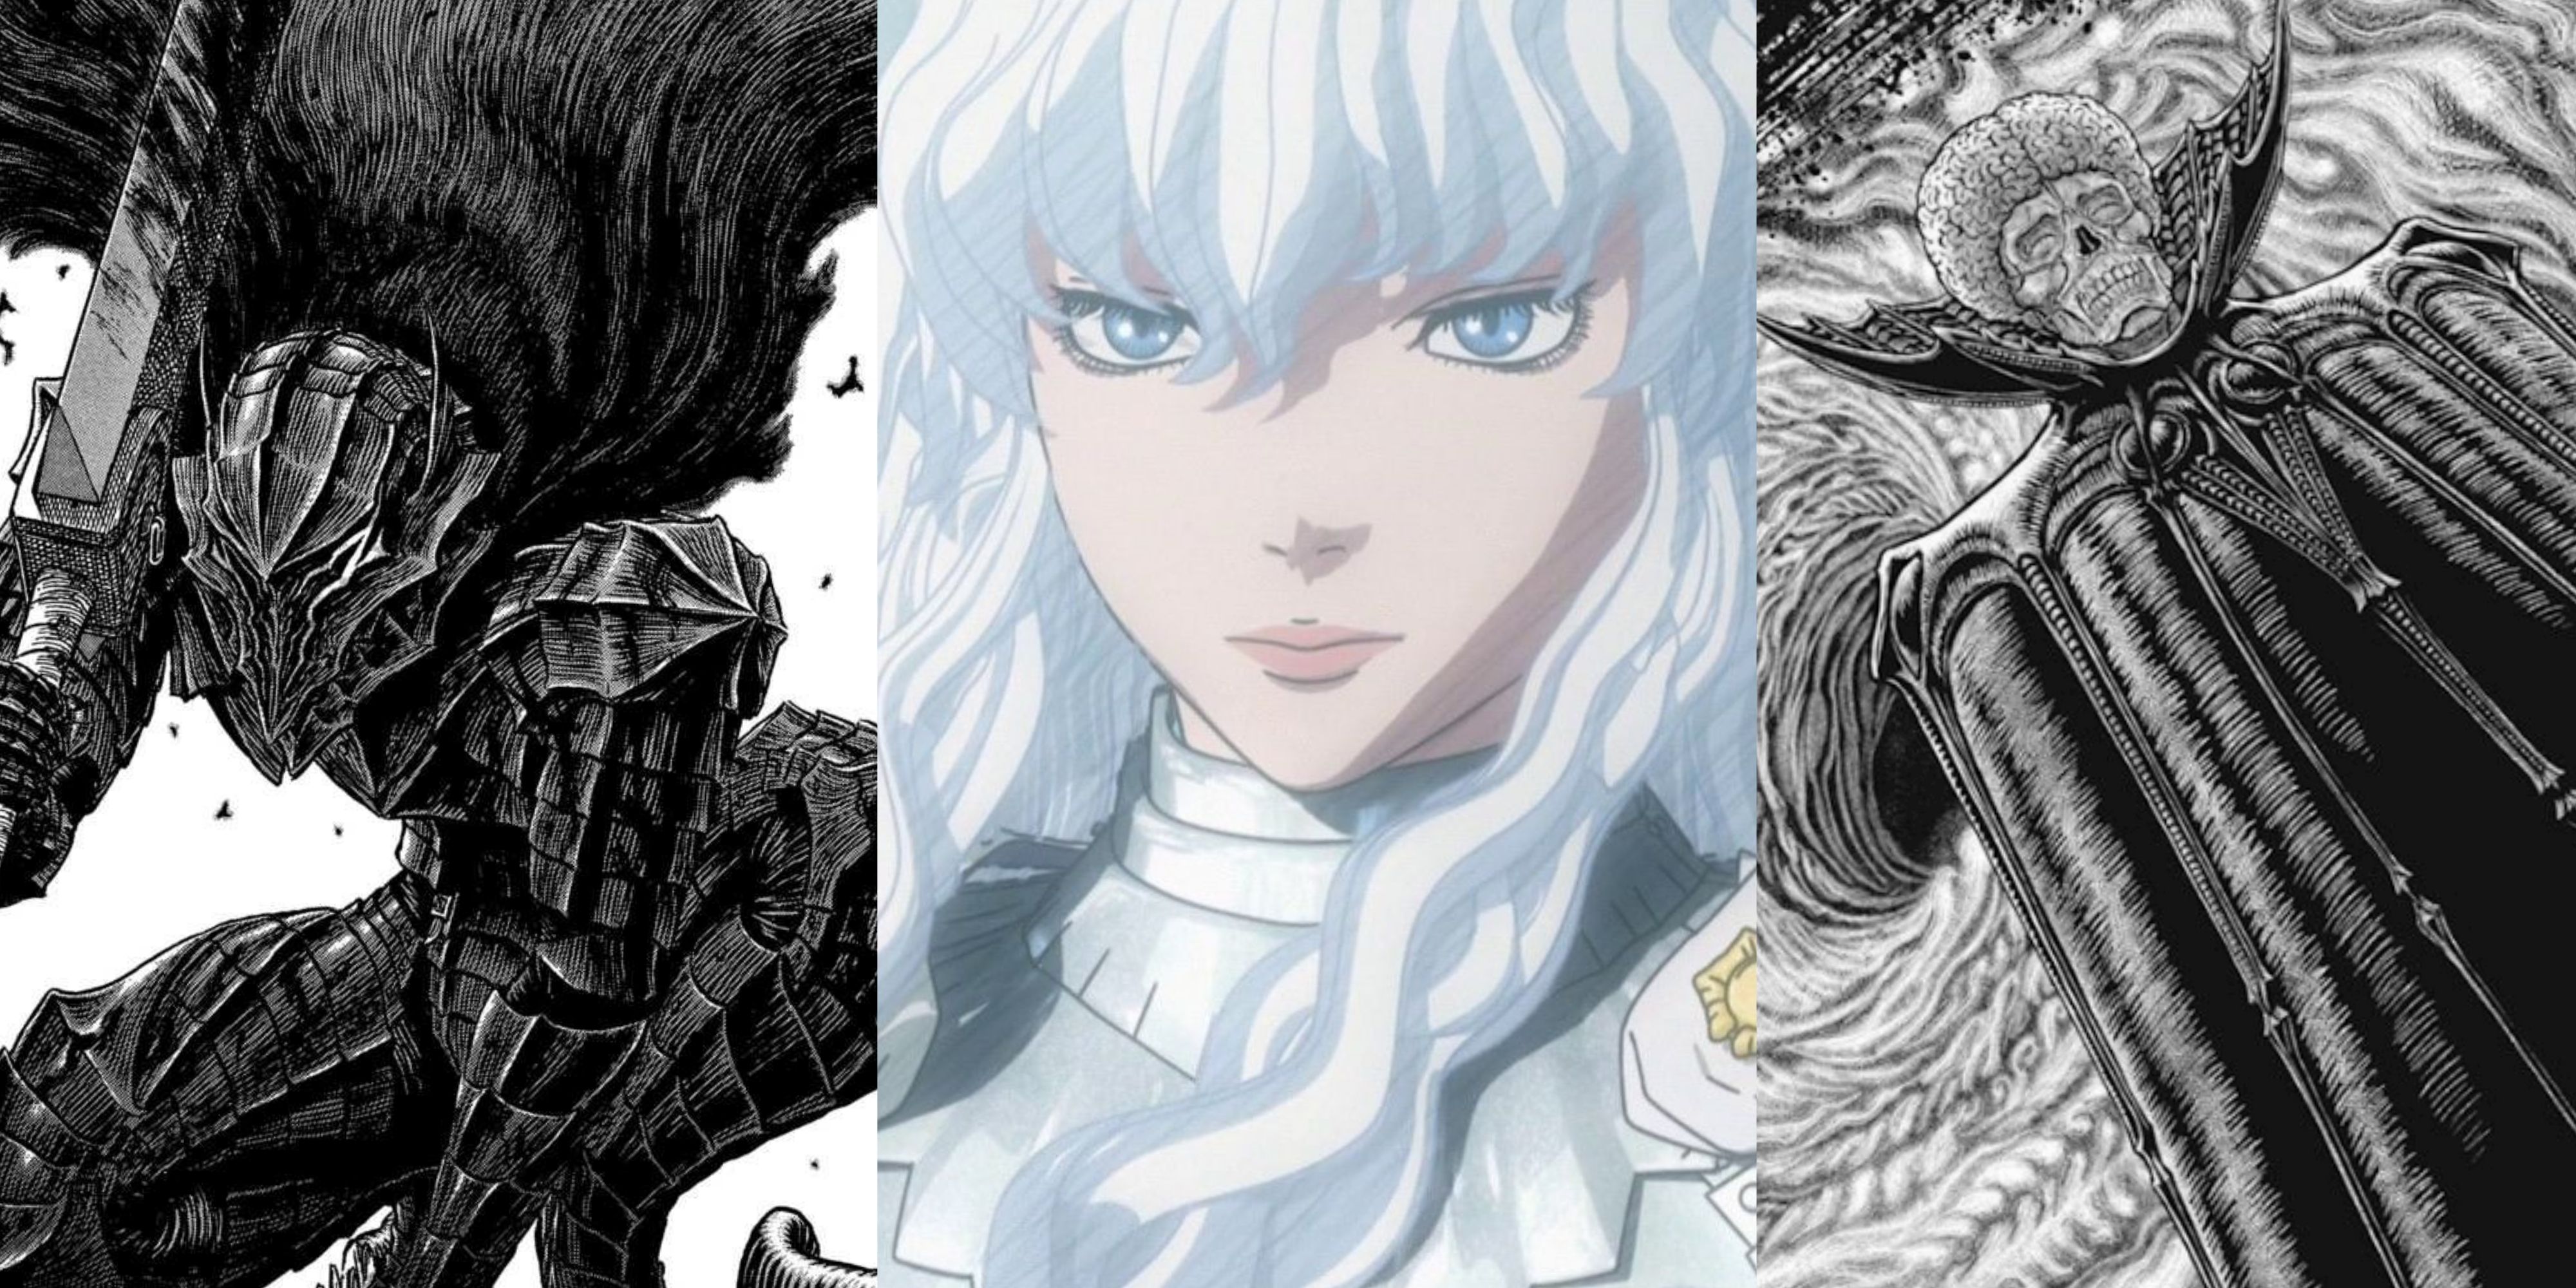 Featured Berserk Most Dangerous Characters Guts Griffith Void